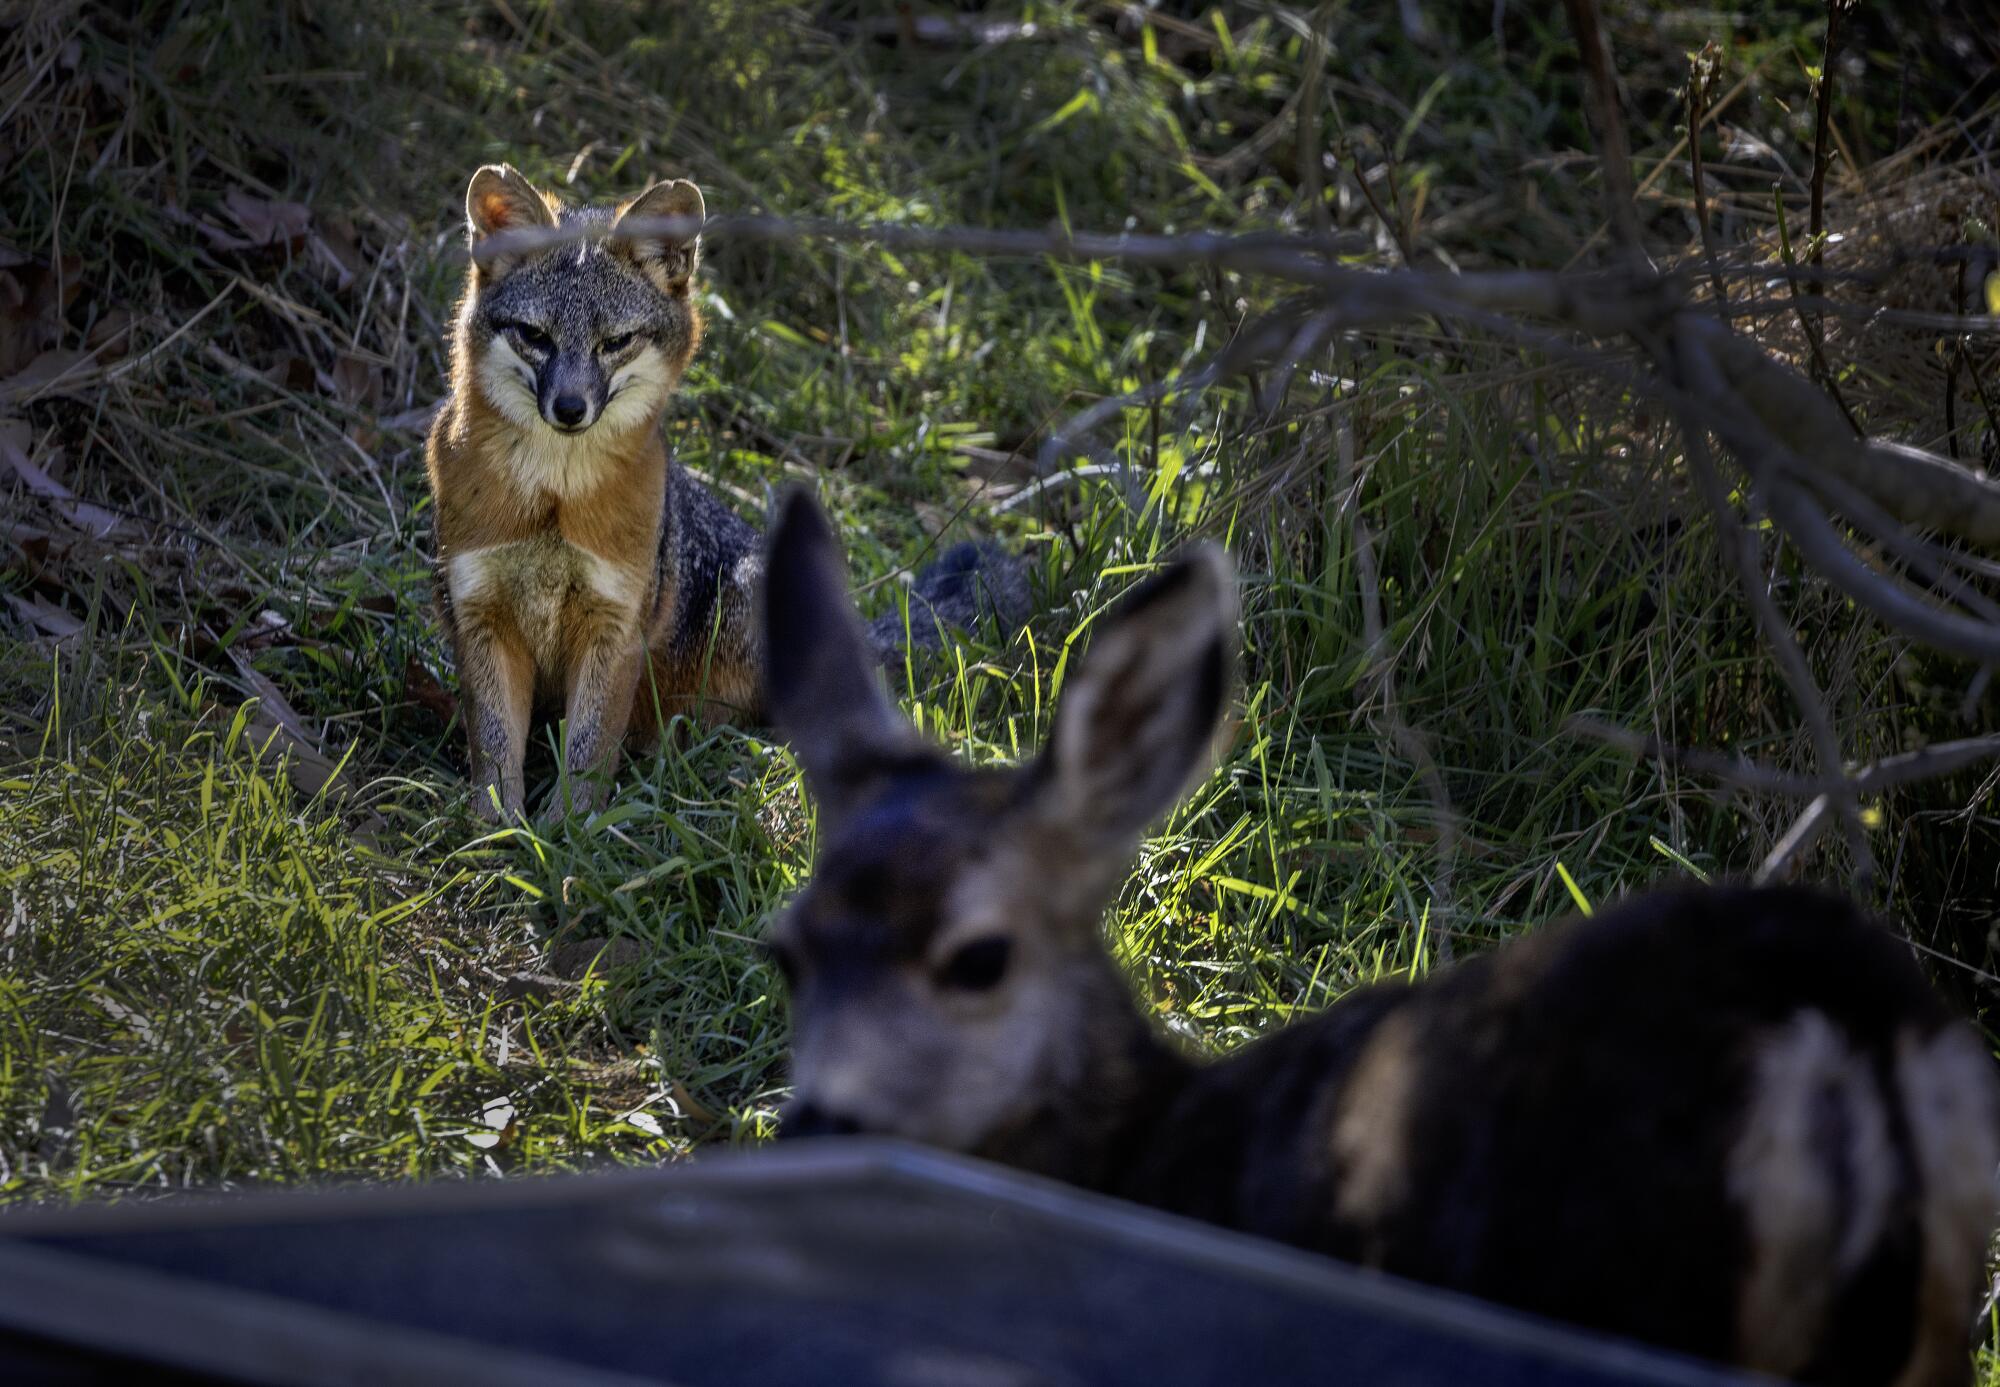 A fox eyes a young deer in a wooded area.